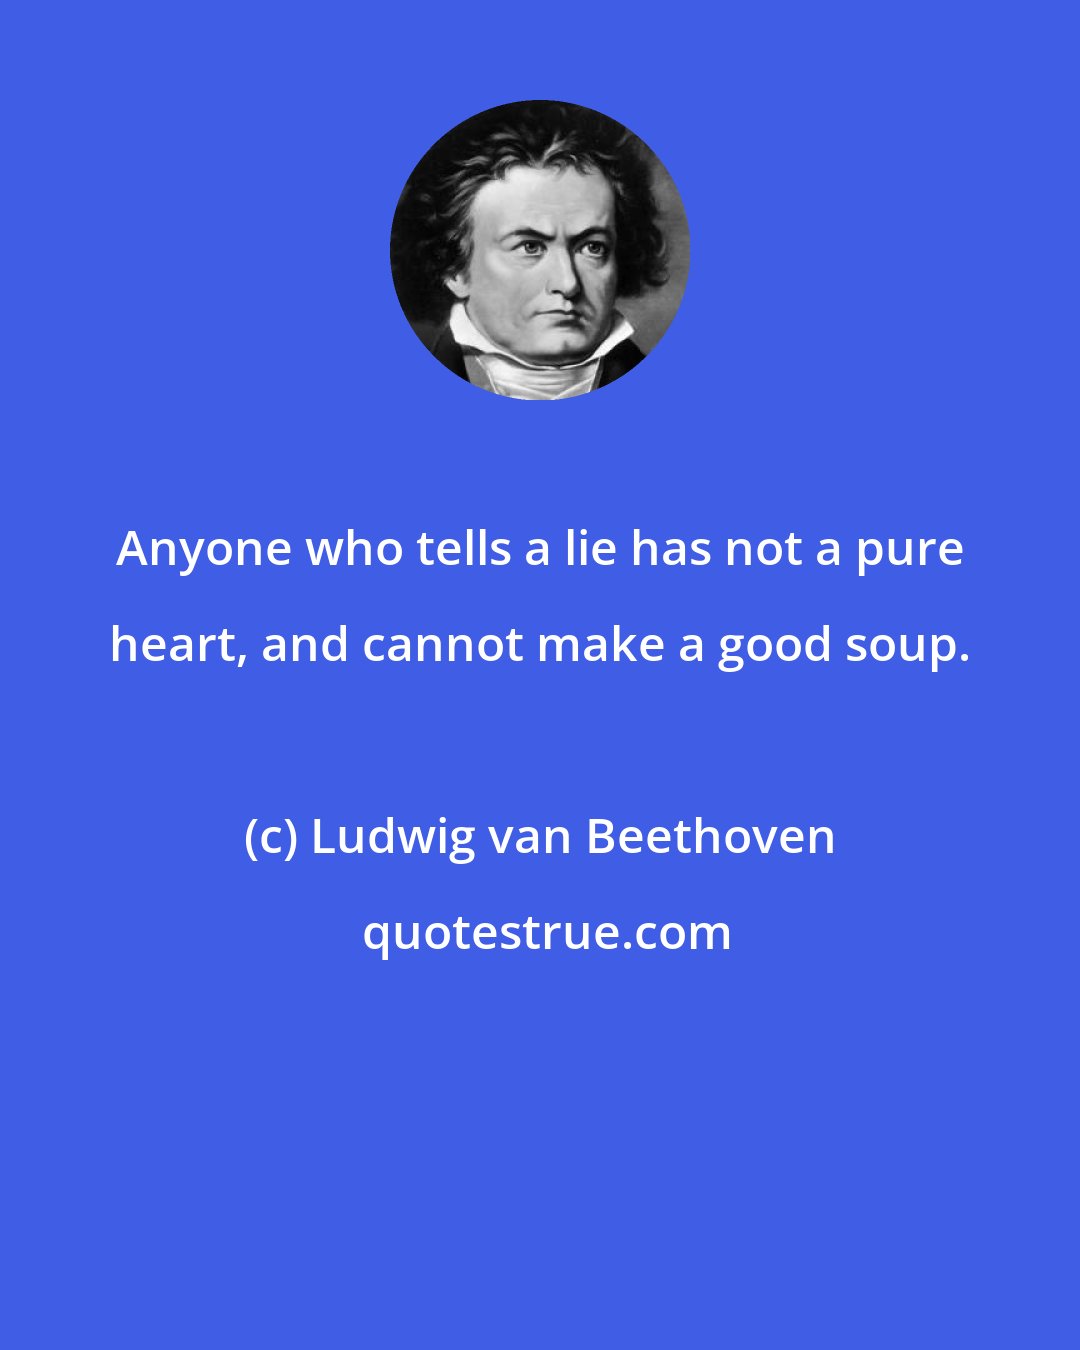 Ludwig van Beethoven: Anyone who tells a lie has not a pure heart, and cannot make a good soup.